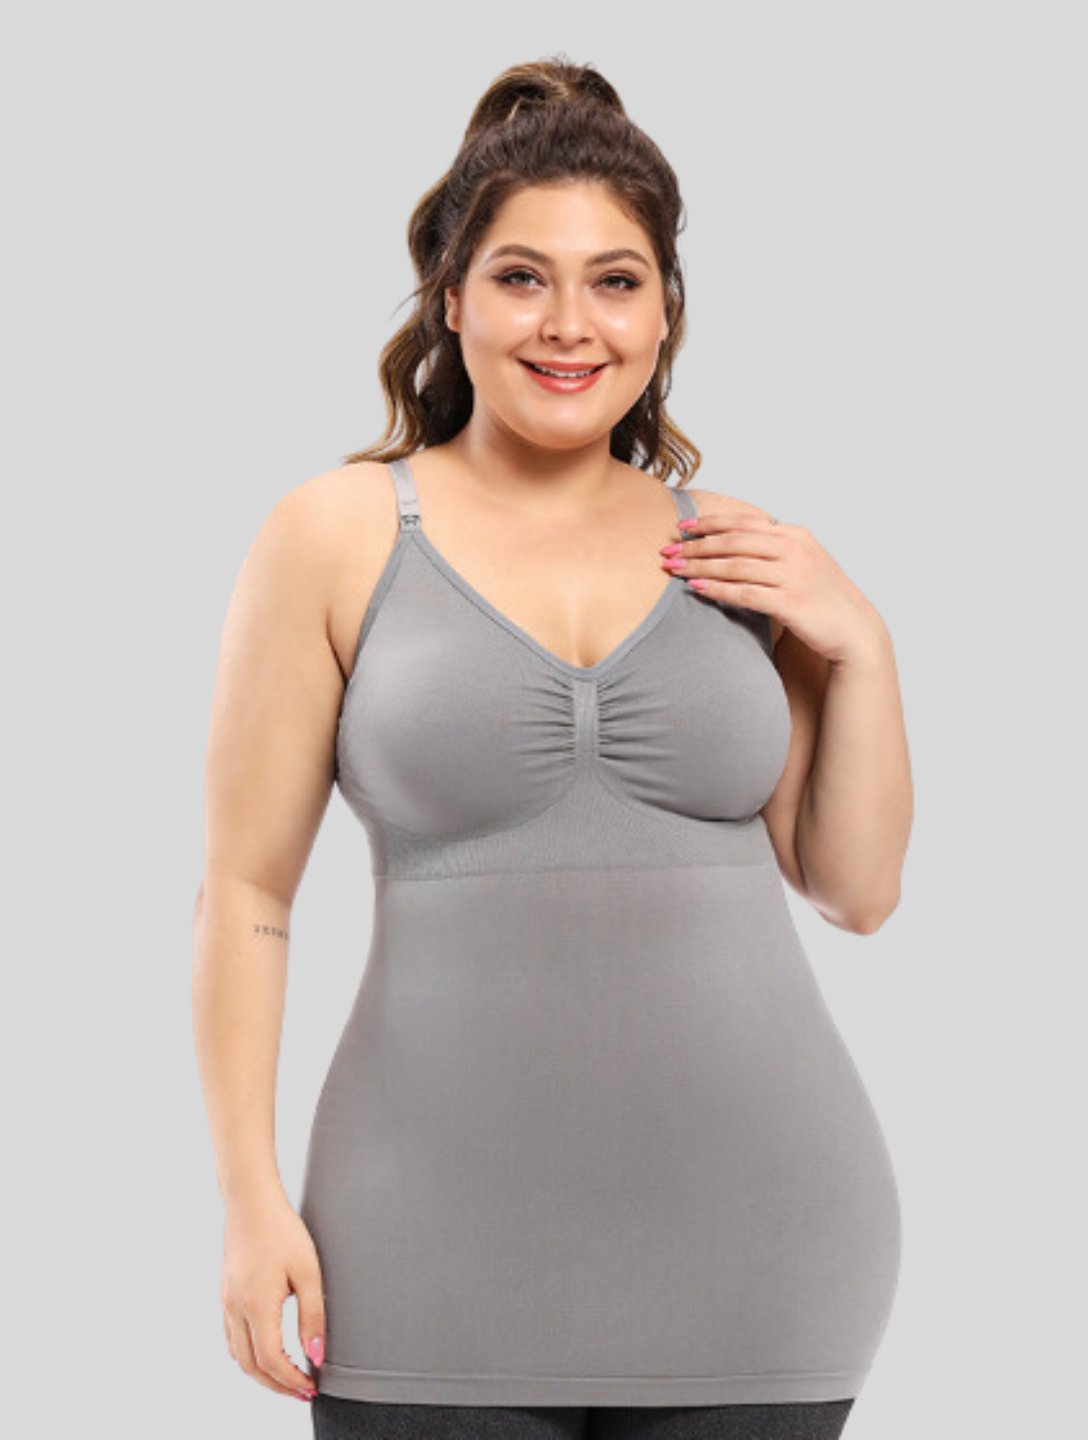 This Viral Shapewear Bodysuit From  Has Shoppers Looking So  'Snatched'—& It's on Sale RN